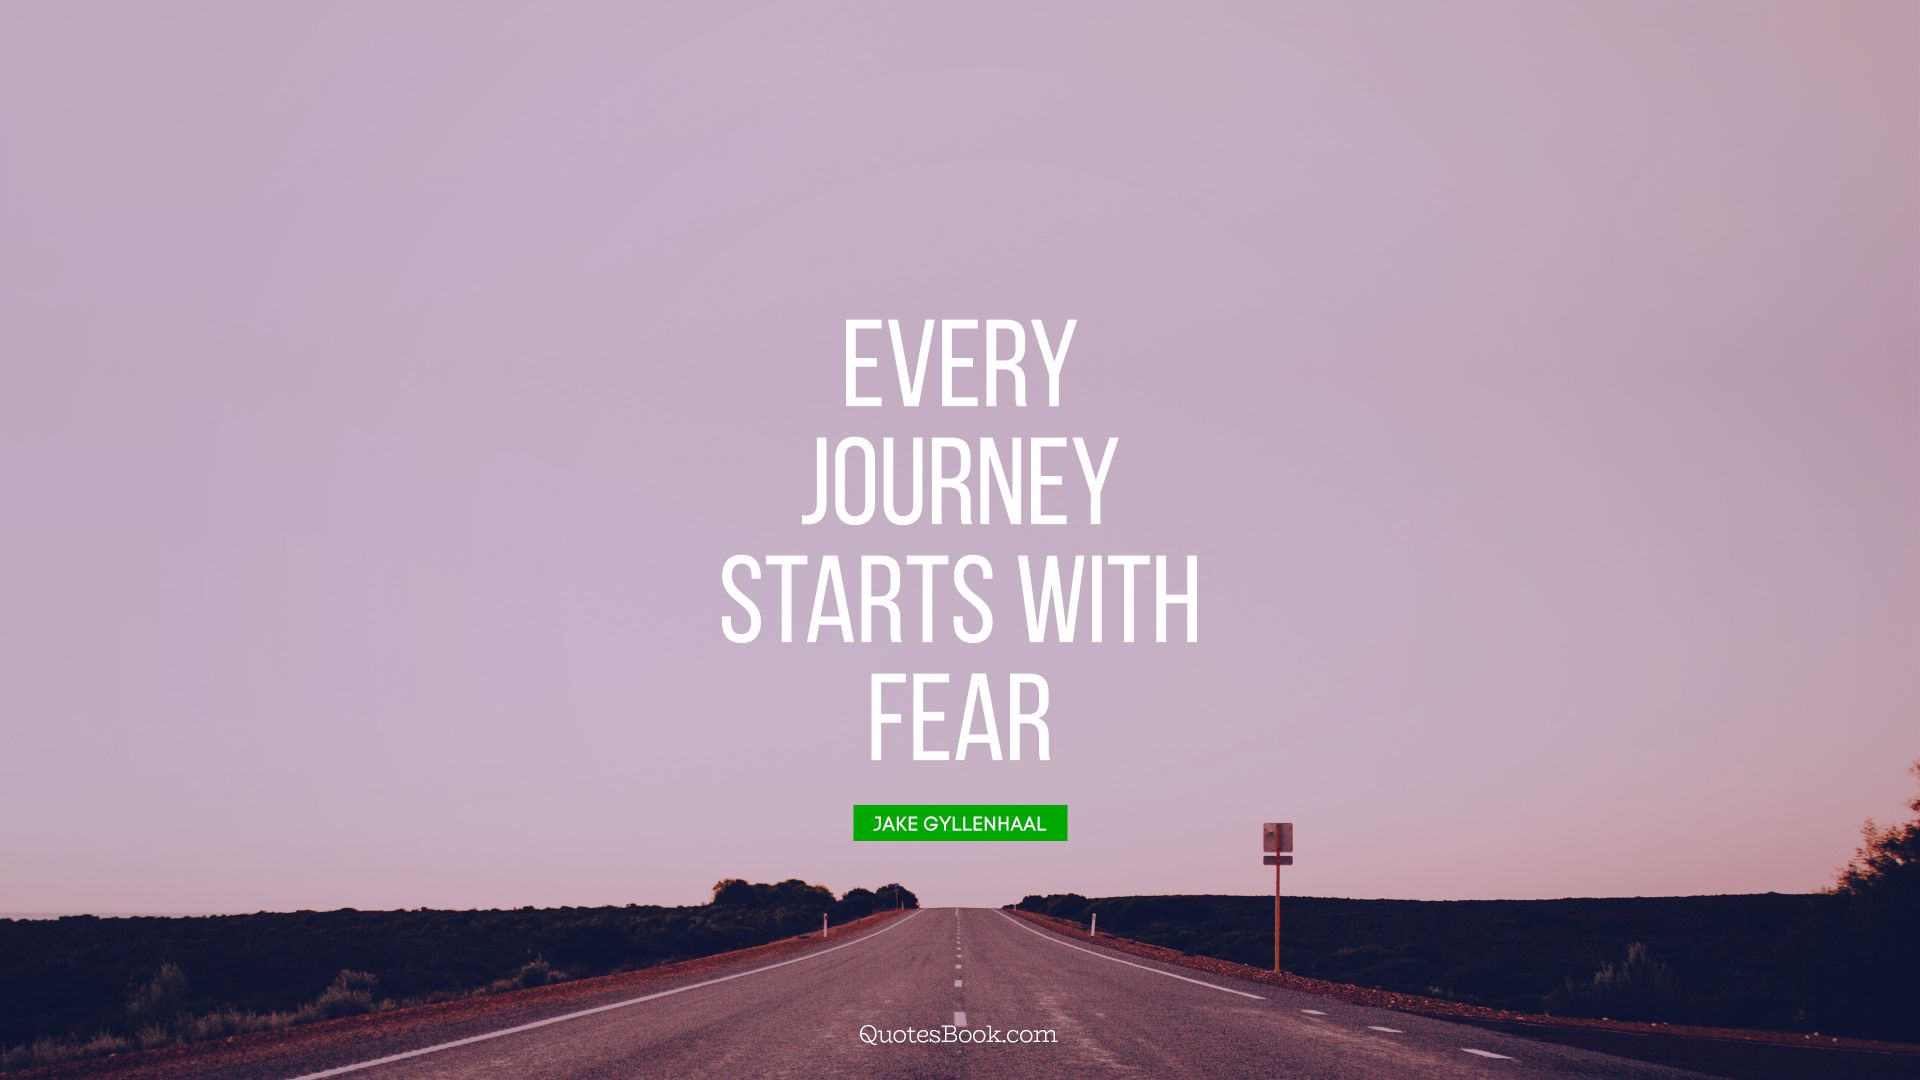 Every journey starts with fear. - Quote by Jake Gyllenhaal